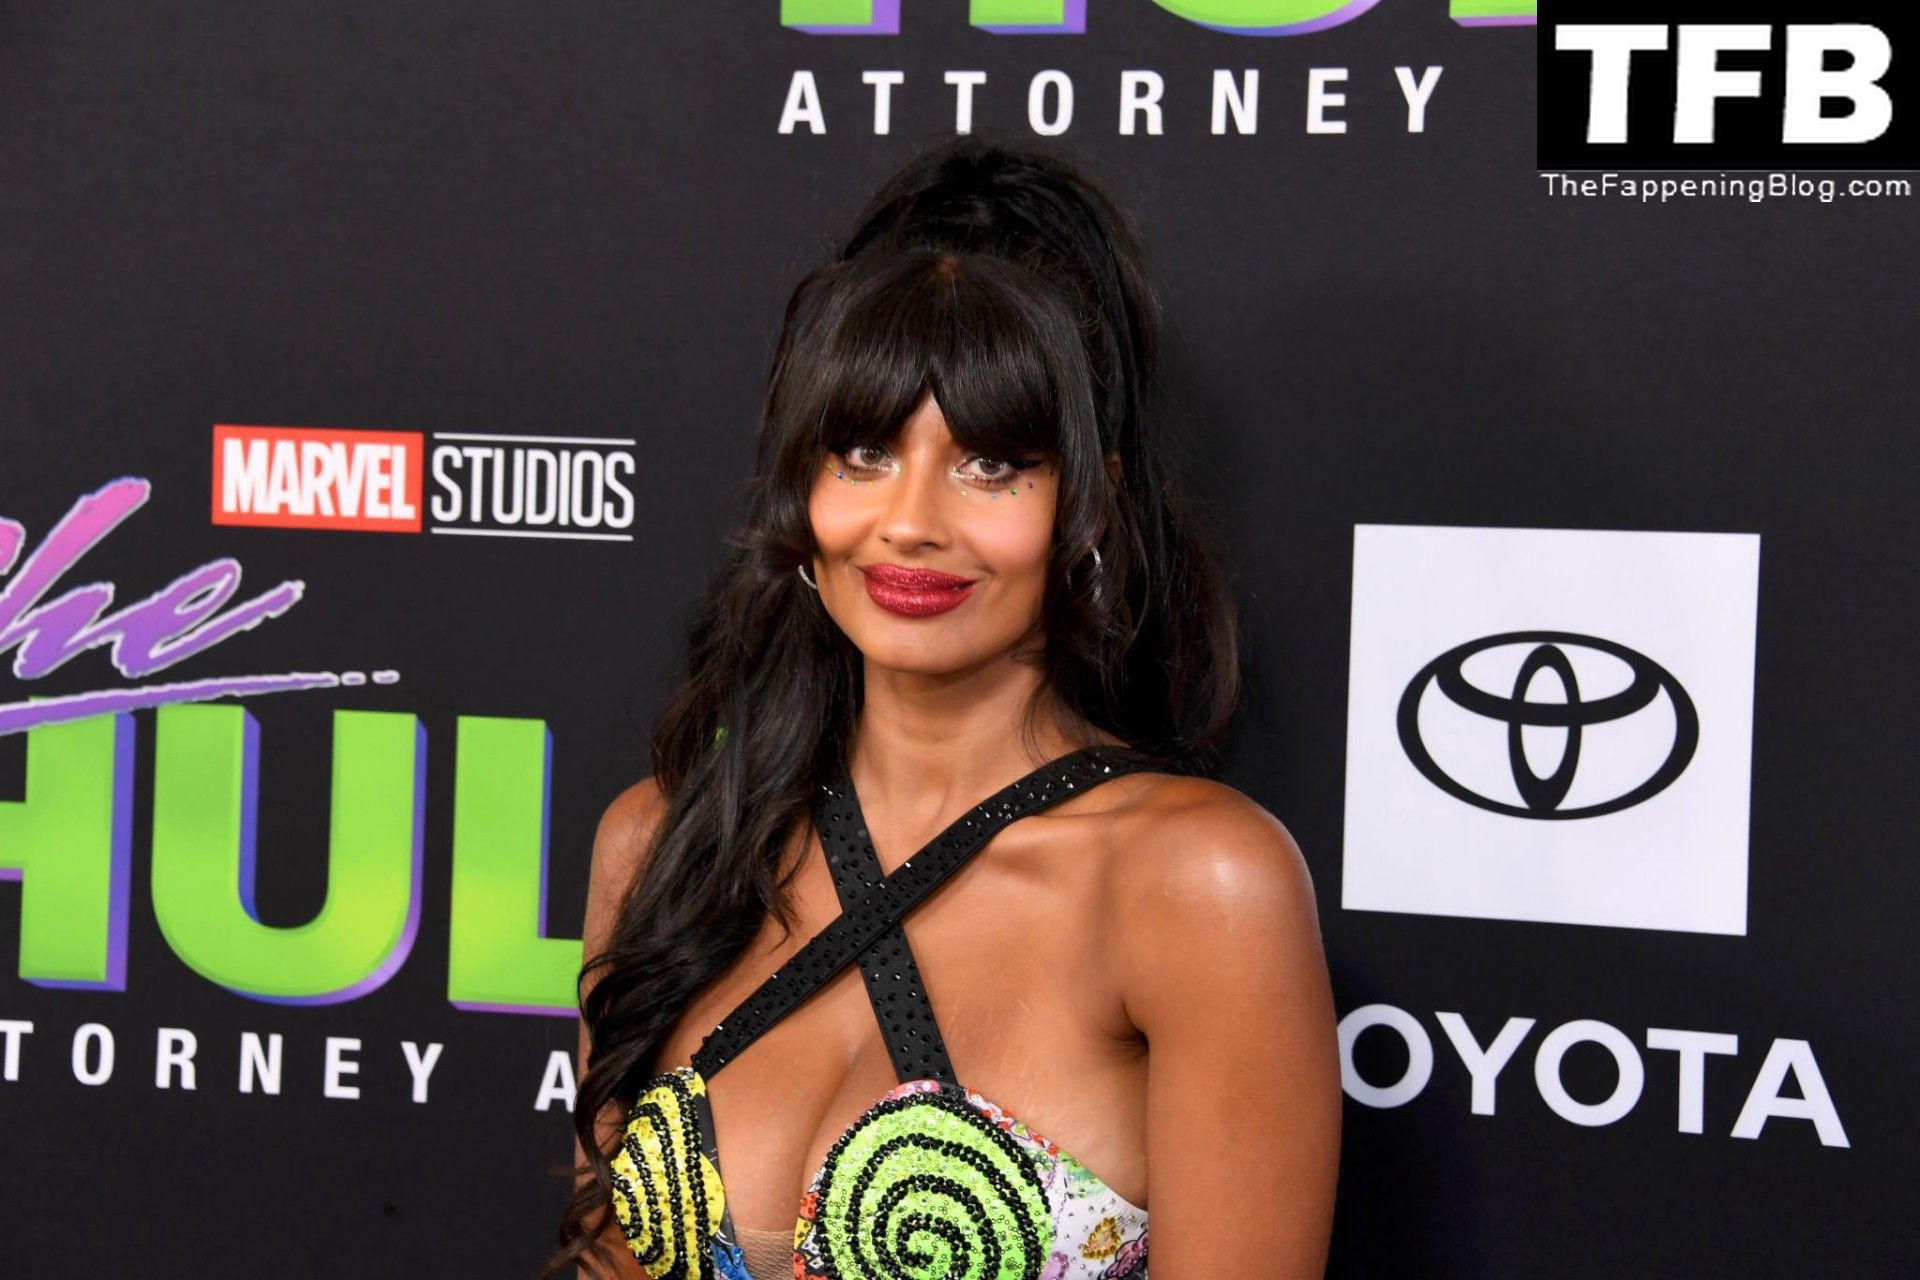 Jameela Jamil Sexy The Fappening Blog 44 - Jameela Jamil Flaunts Her Big Tits at the Premiere of Disney+’s “She Hulk: Attorney at Law” in LA (53 Photos)